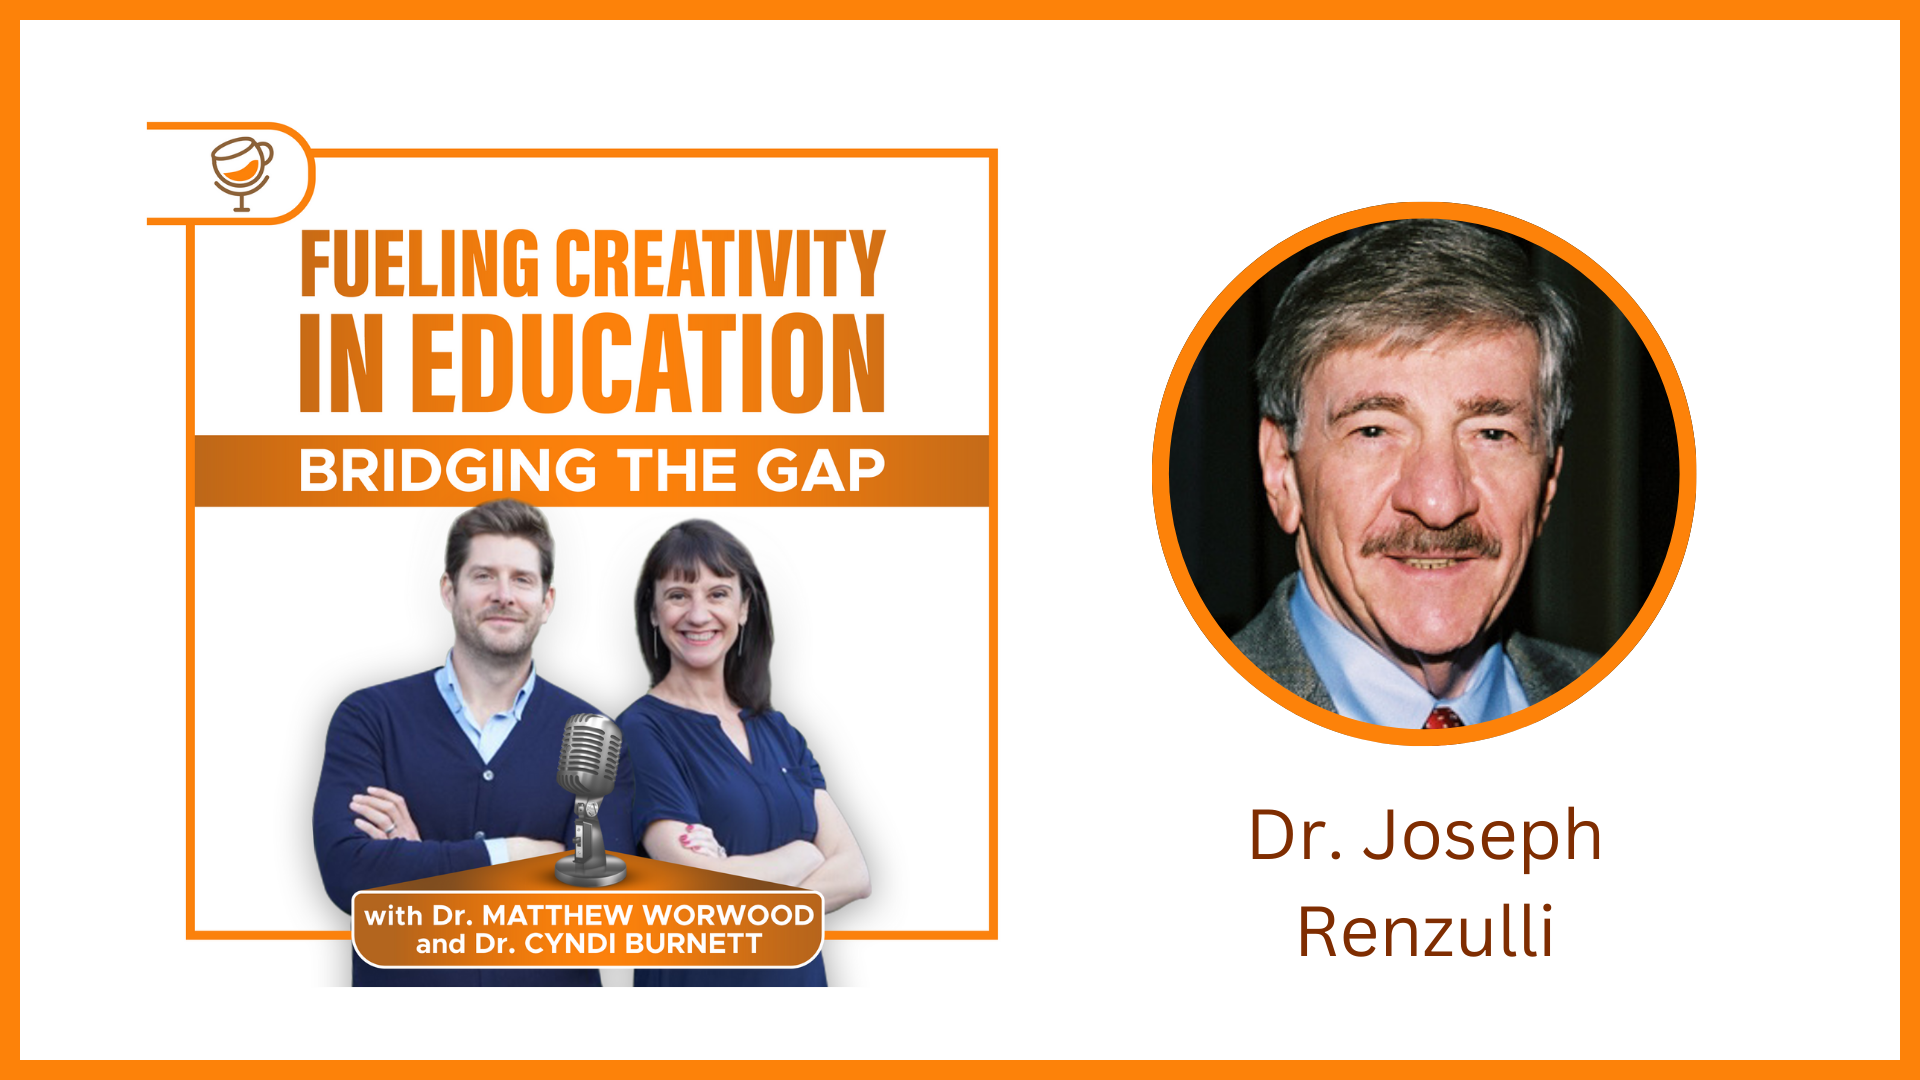 How to Engage, Inspire, and Promote Creativity with Dr. Joseph Renzulli